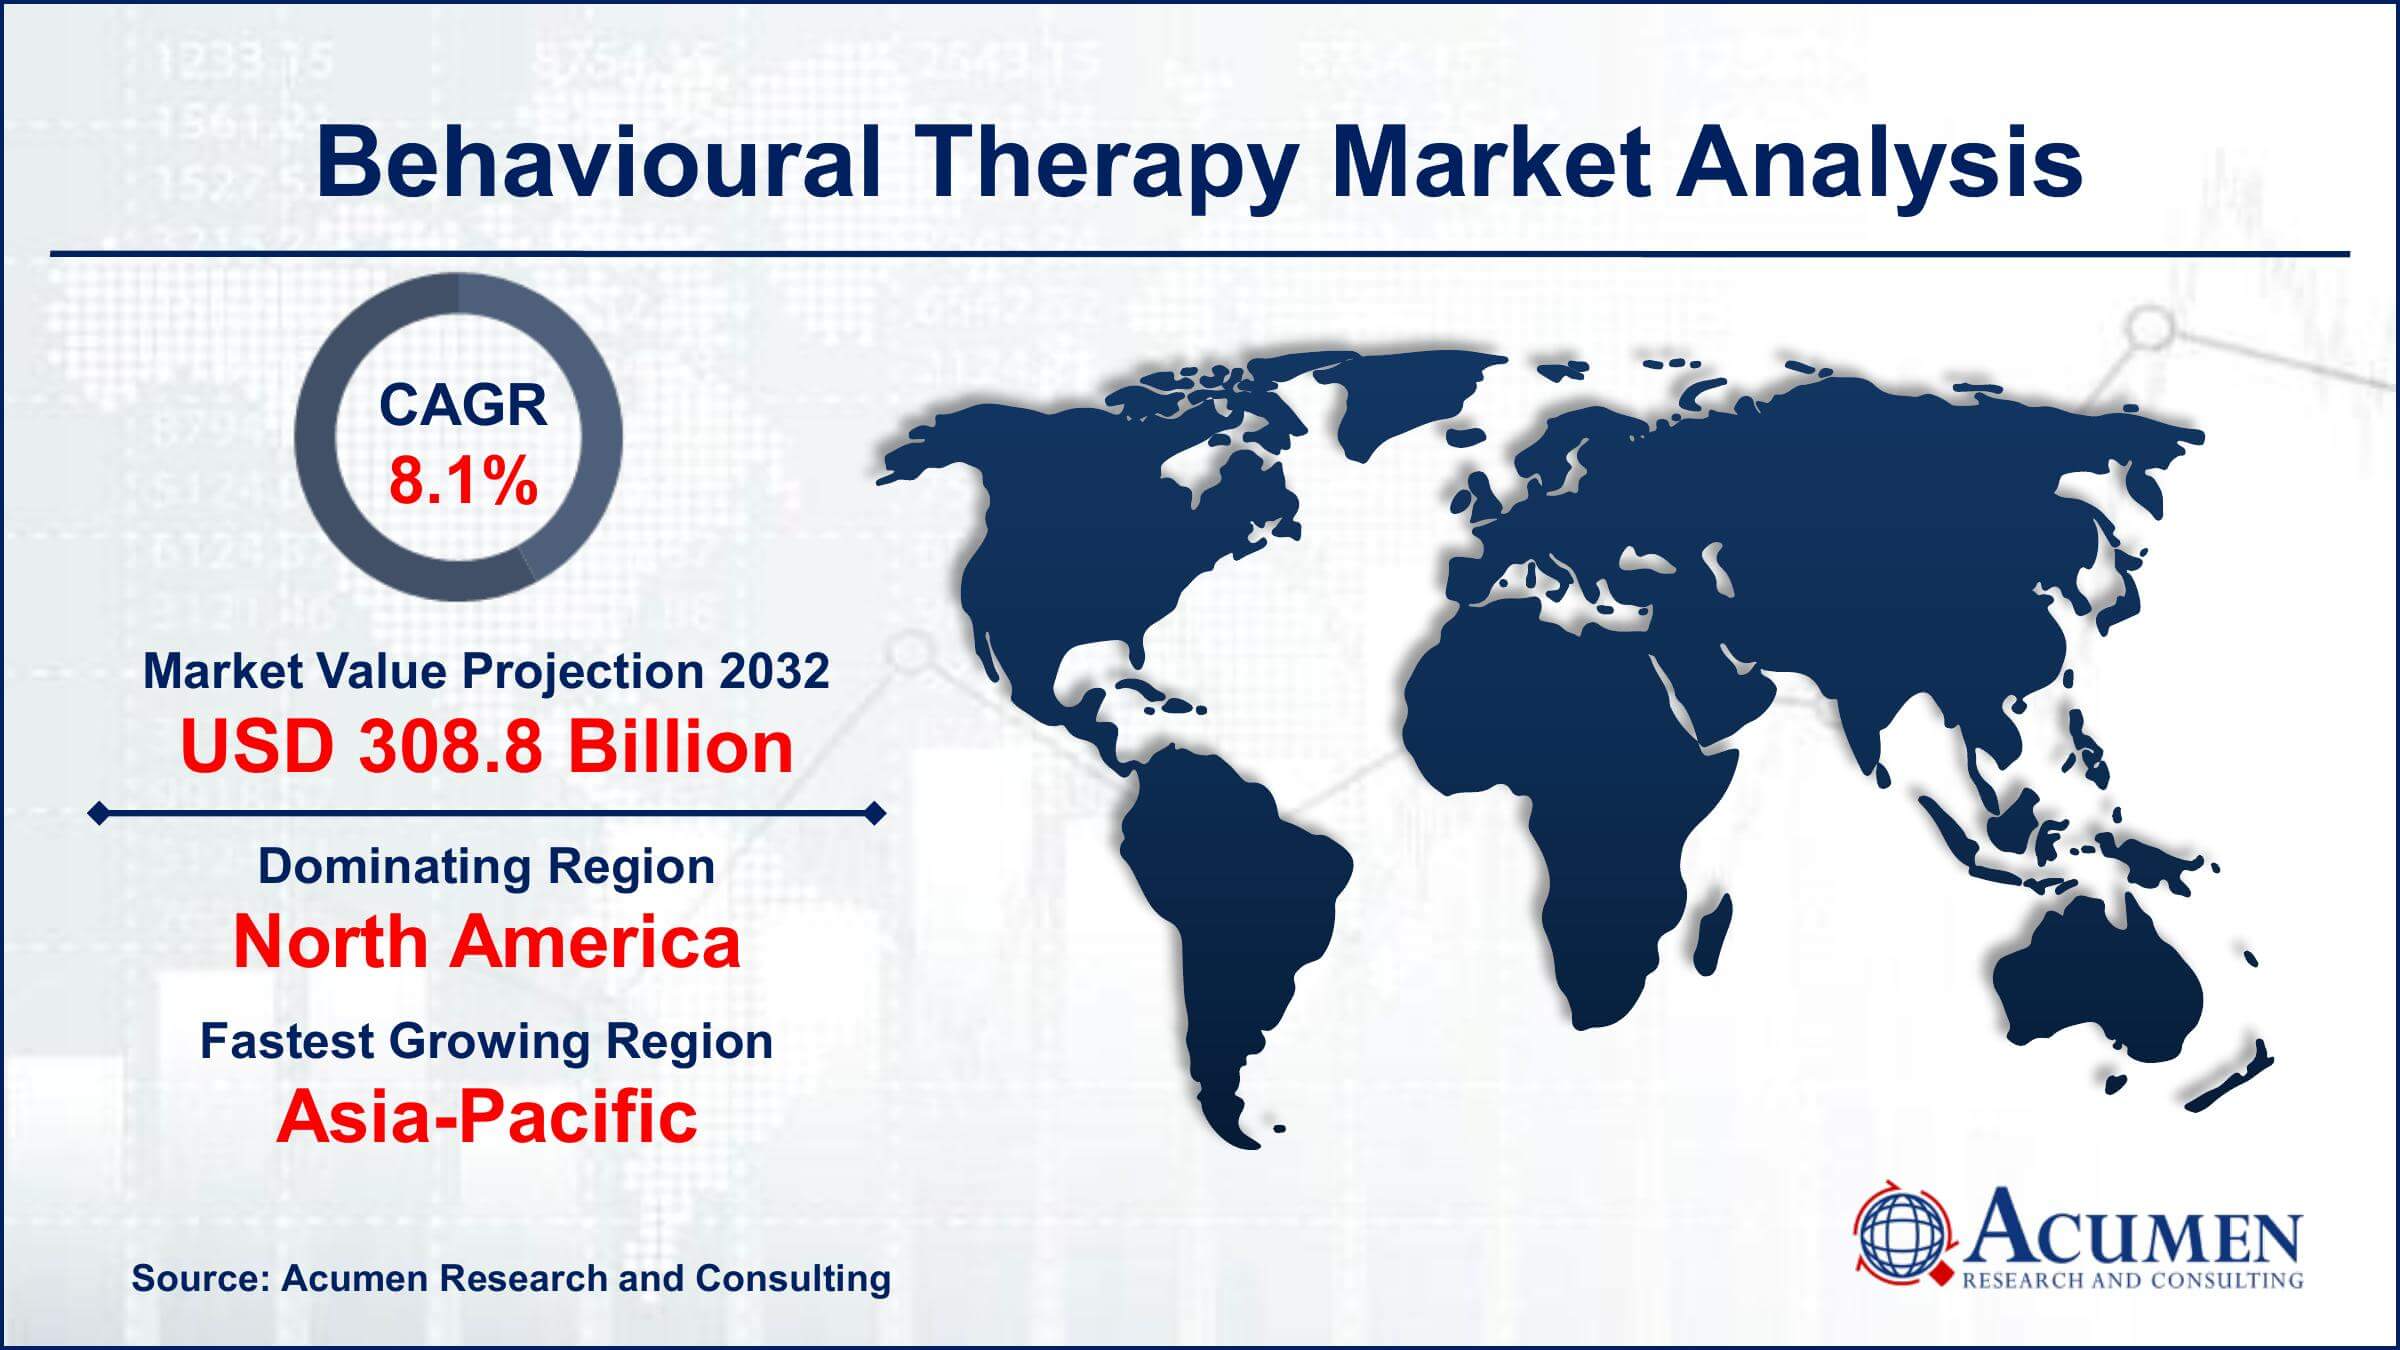 Global Behavioral Therapy Market Trends